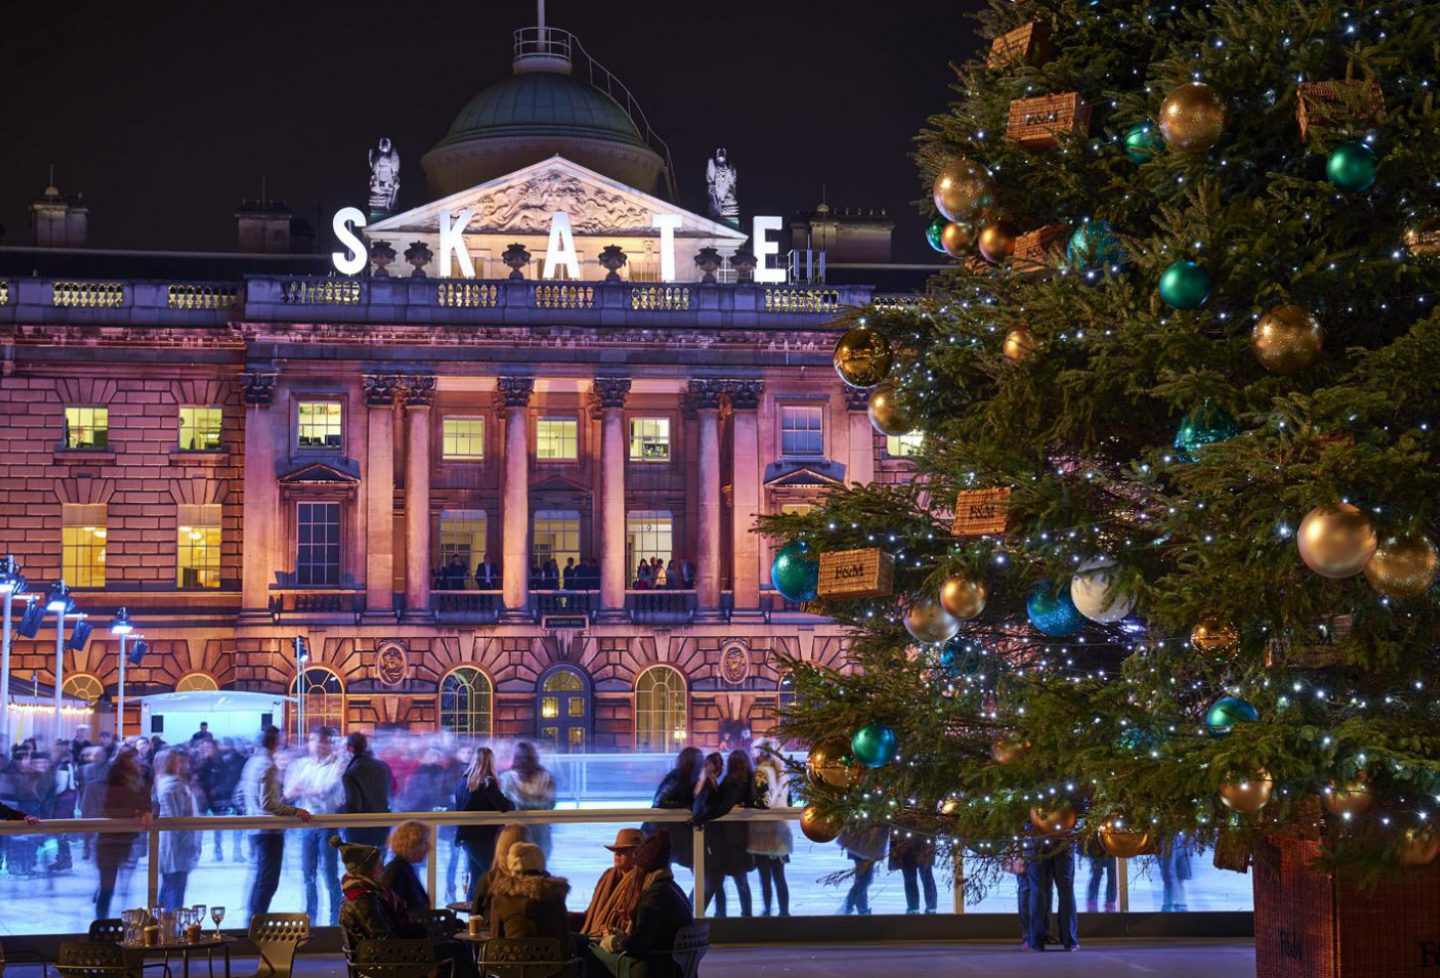 Get your Skates on in London with These Six Scenic Outdoor Ice Rinks